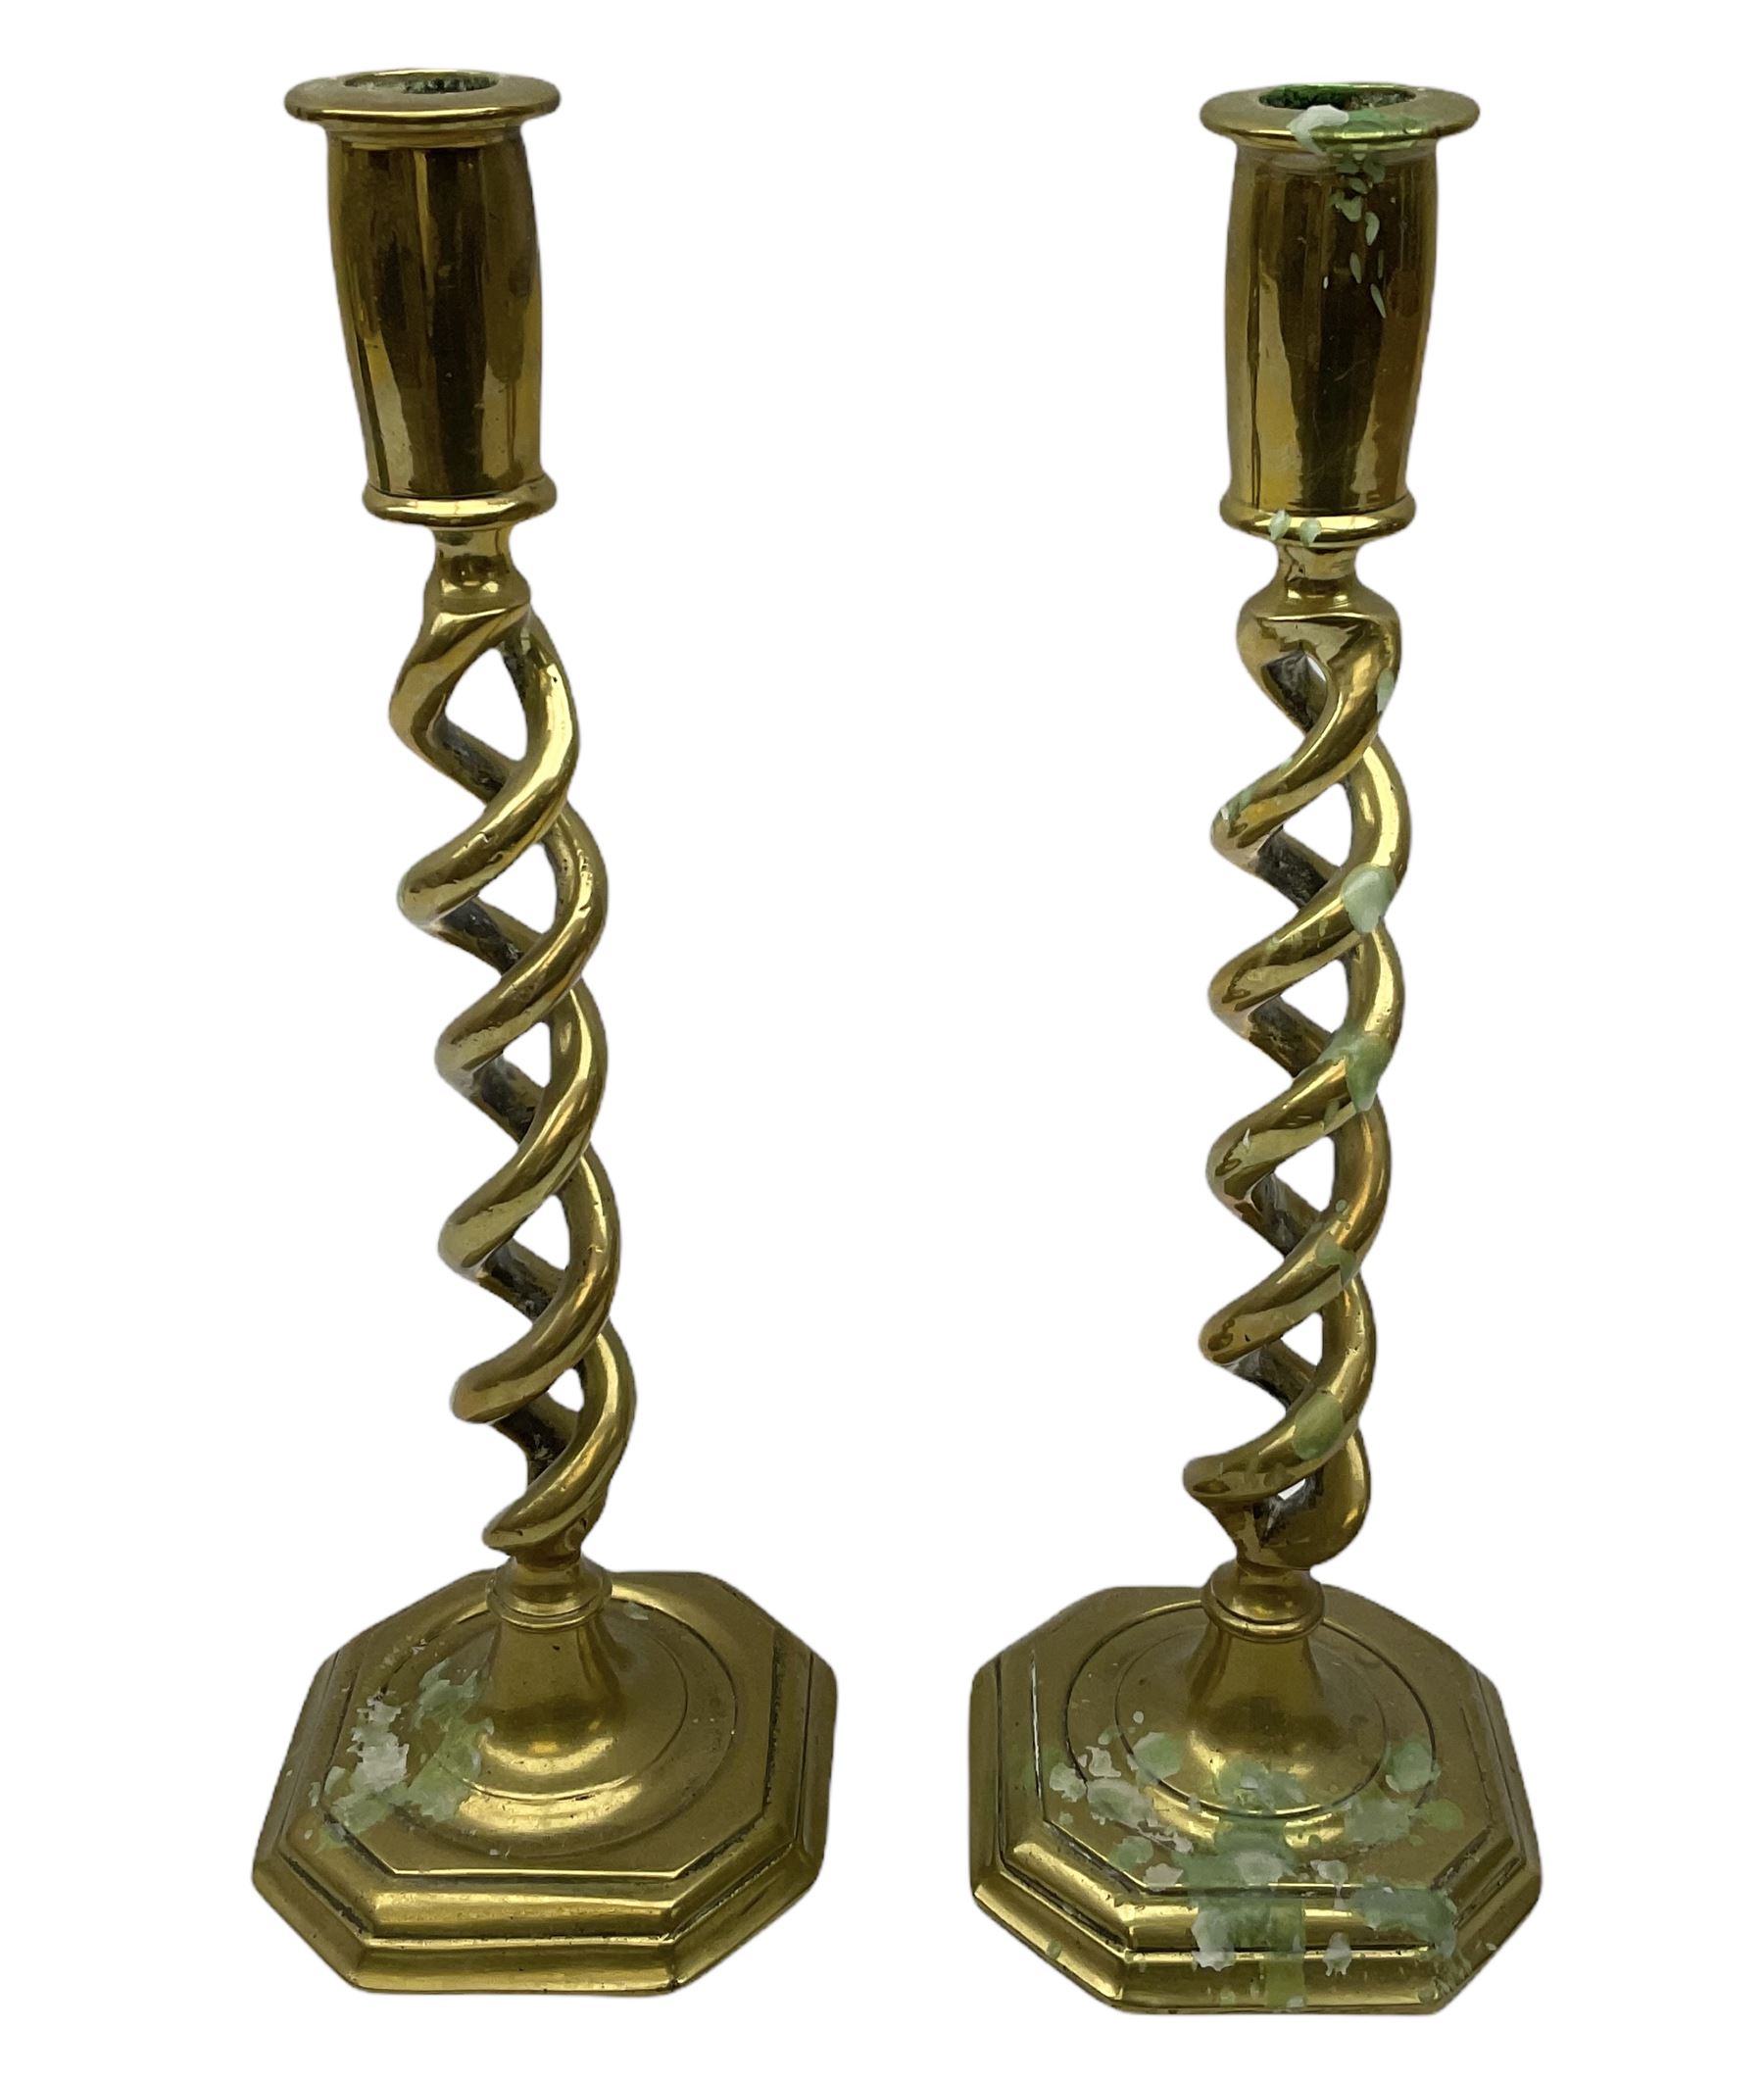 Pair of brass barley twist candlesticks - Collectors & Clearance Sale